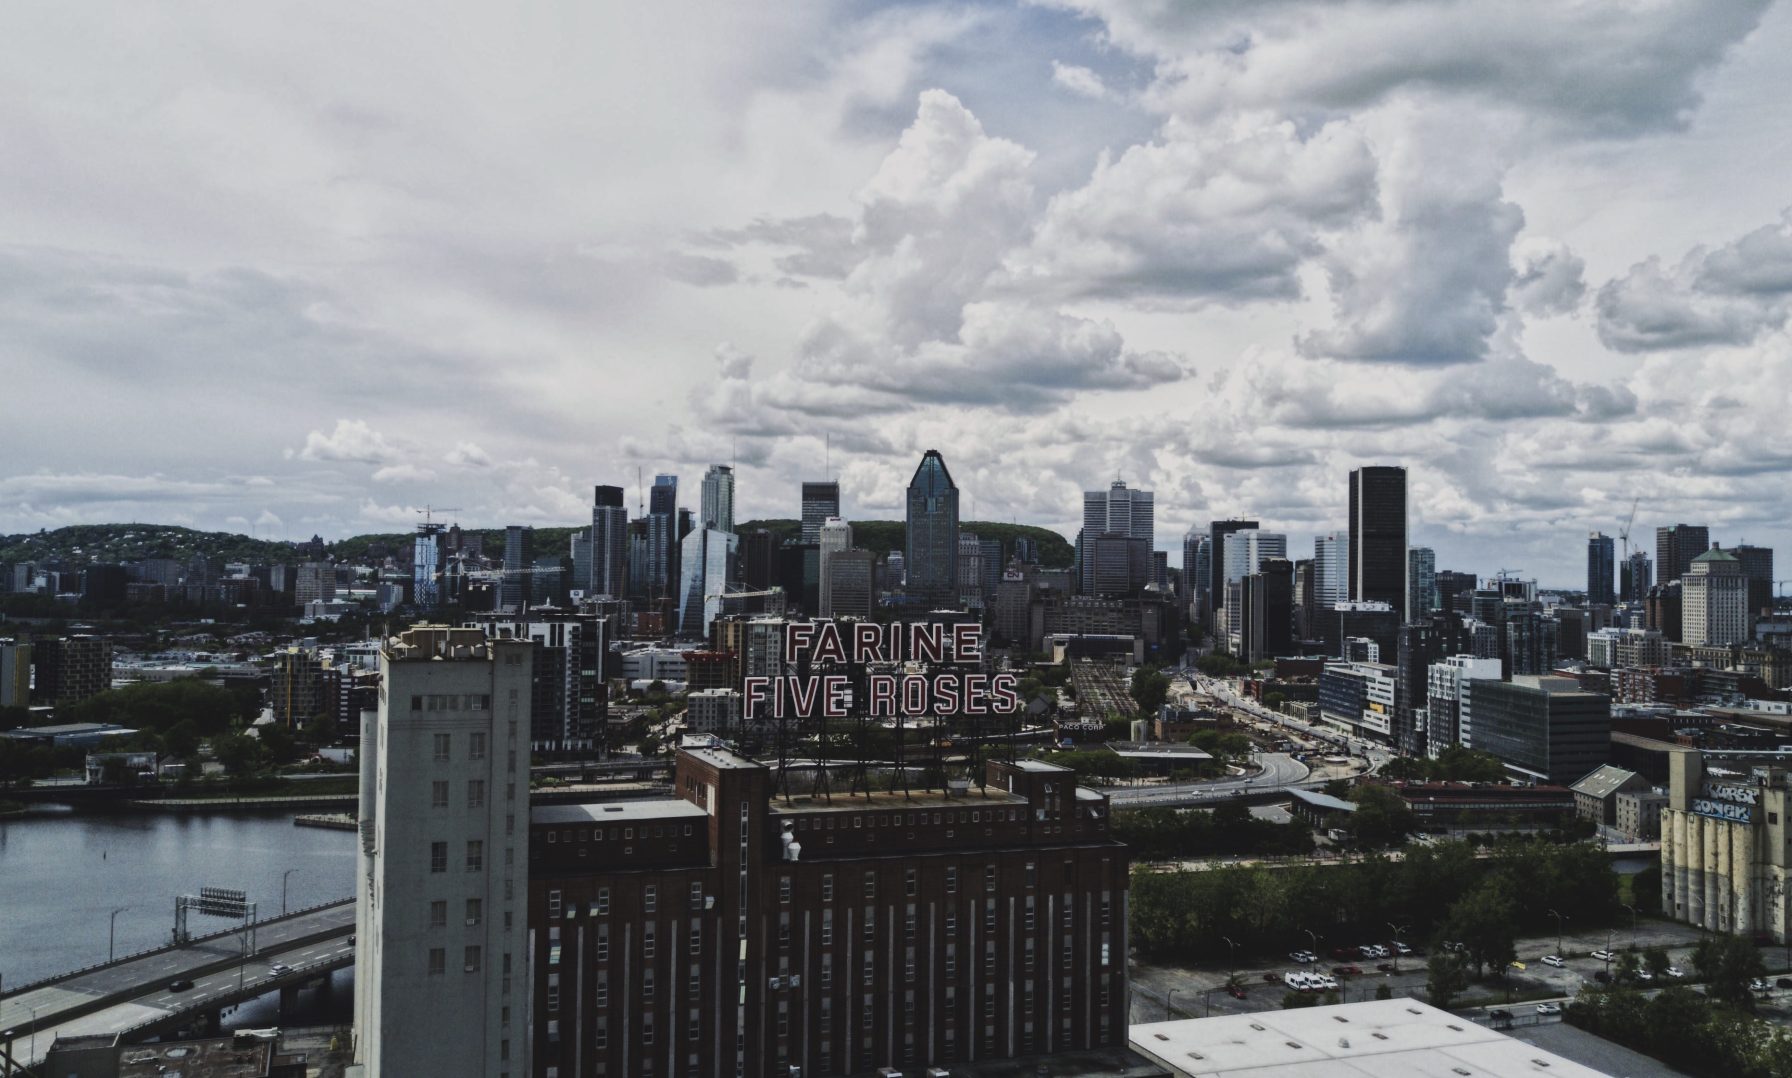 View of Montreal and Farine Five Roses